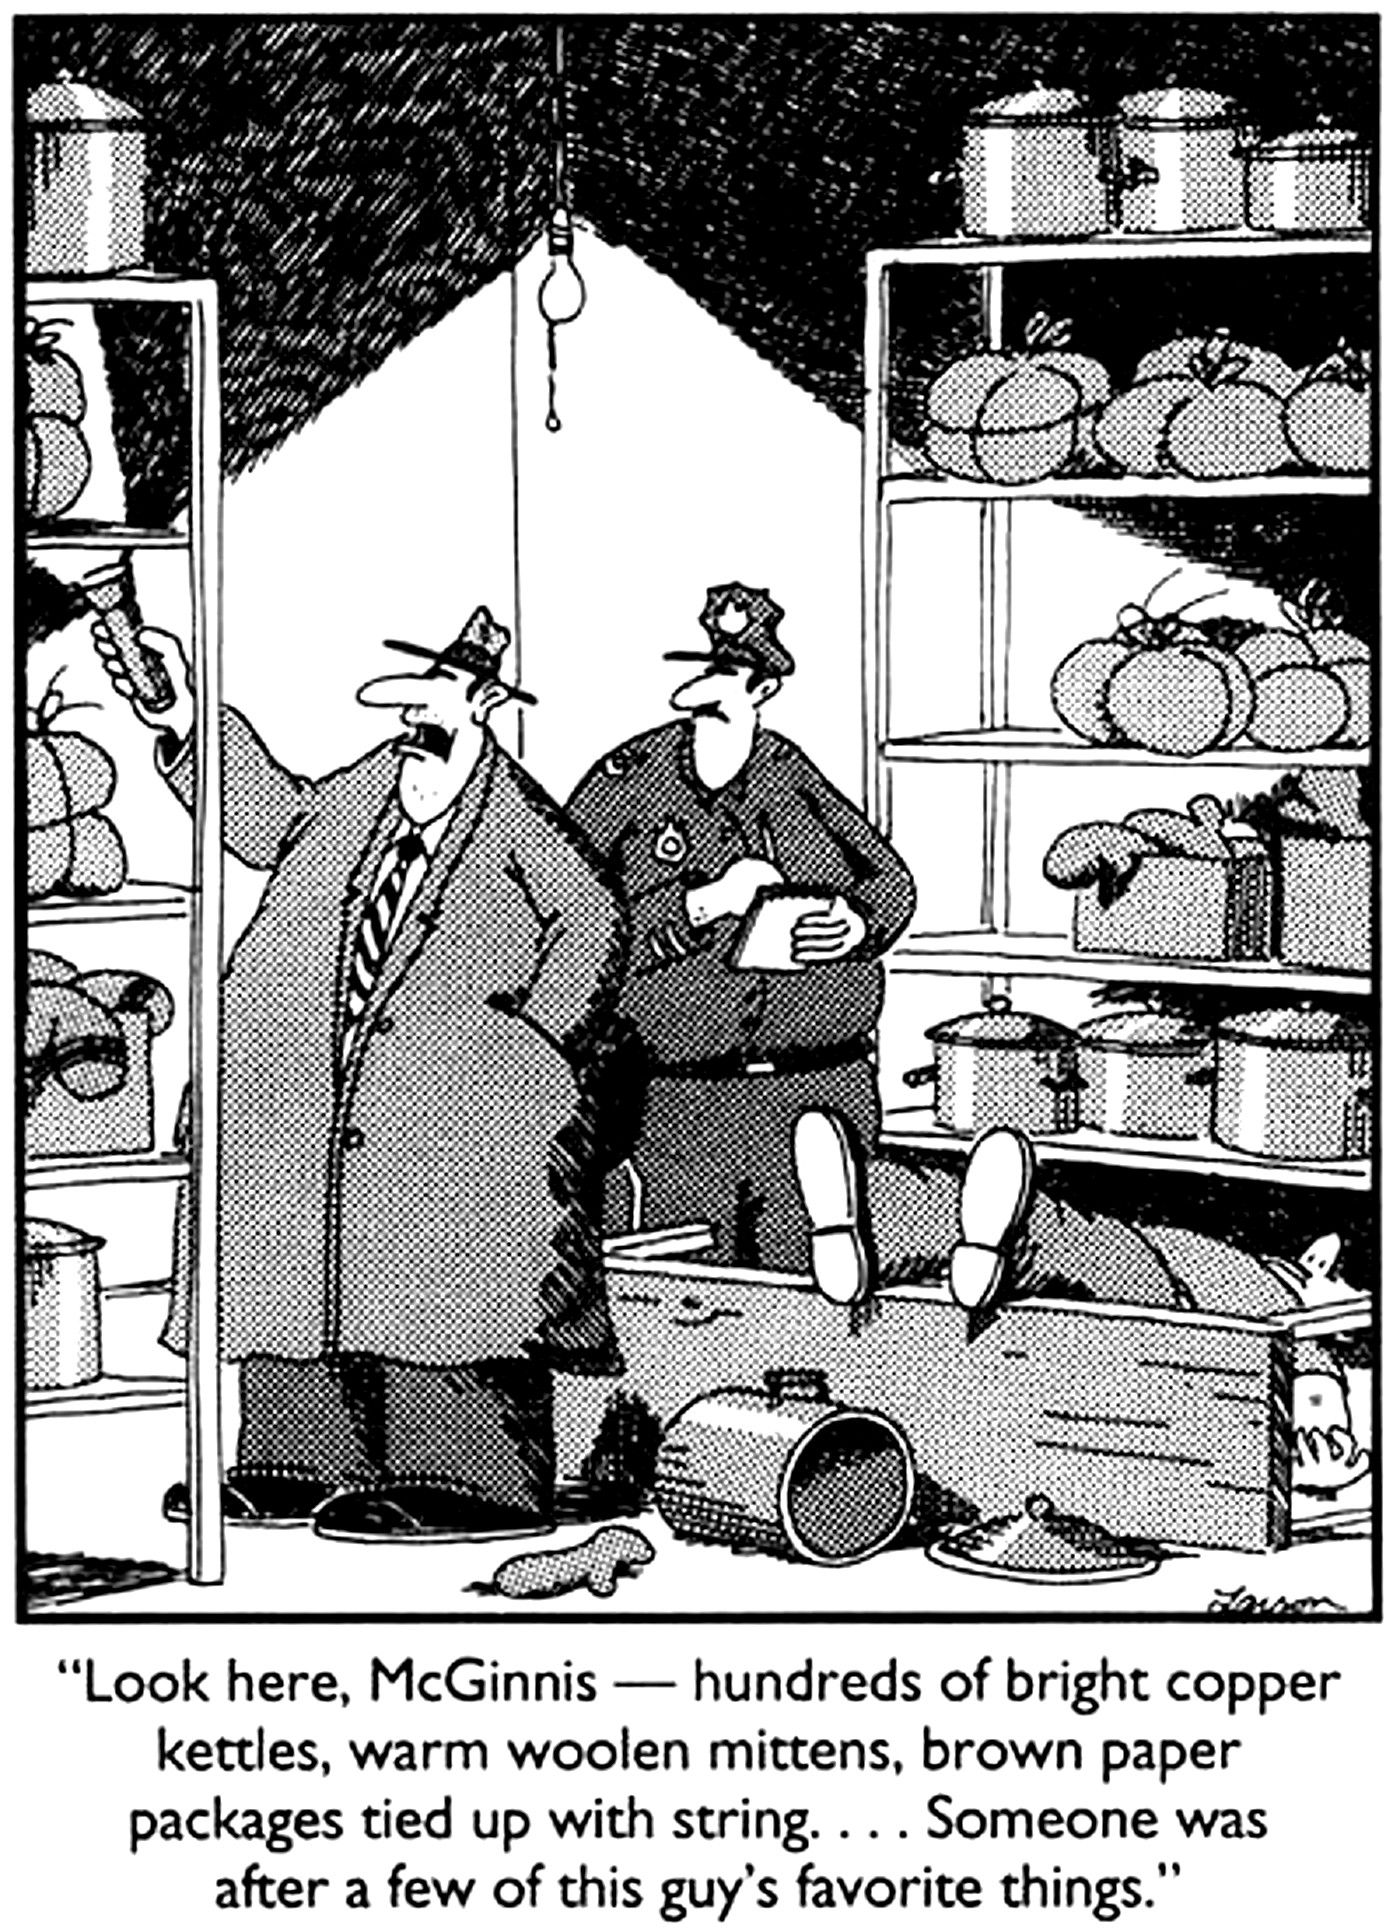 THE FAR SIDE FAVORITE THINGS